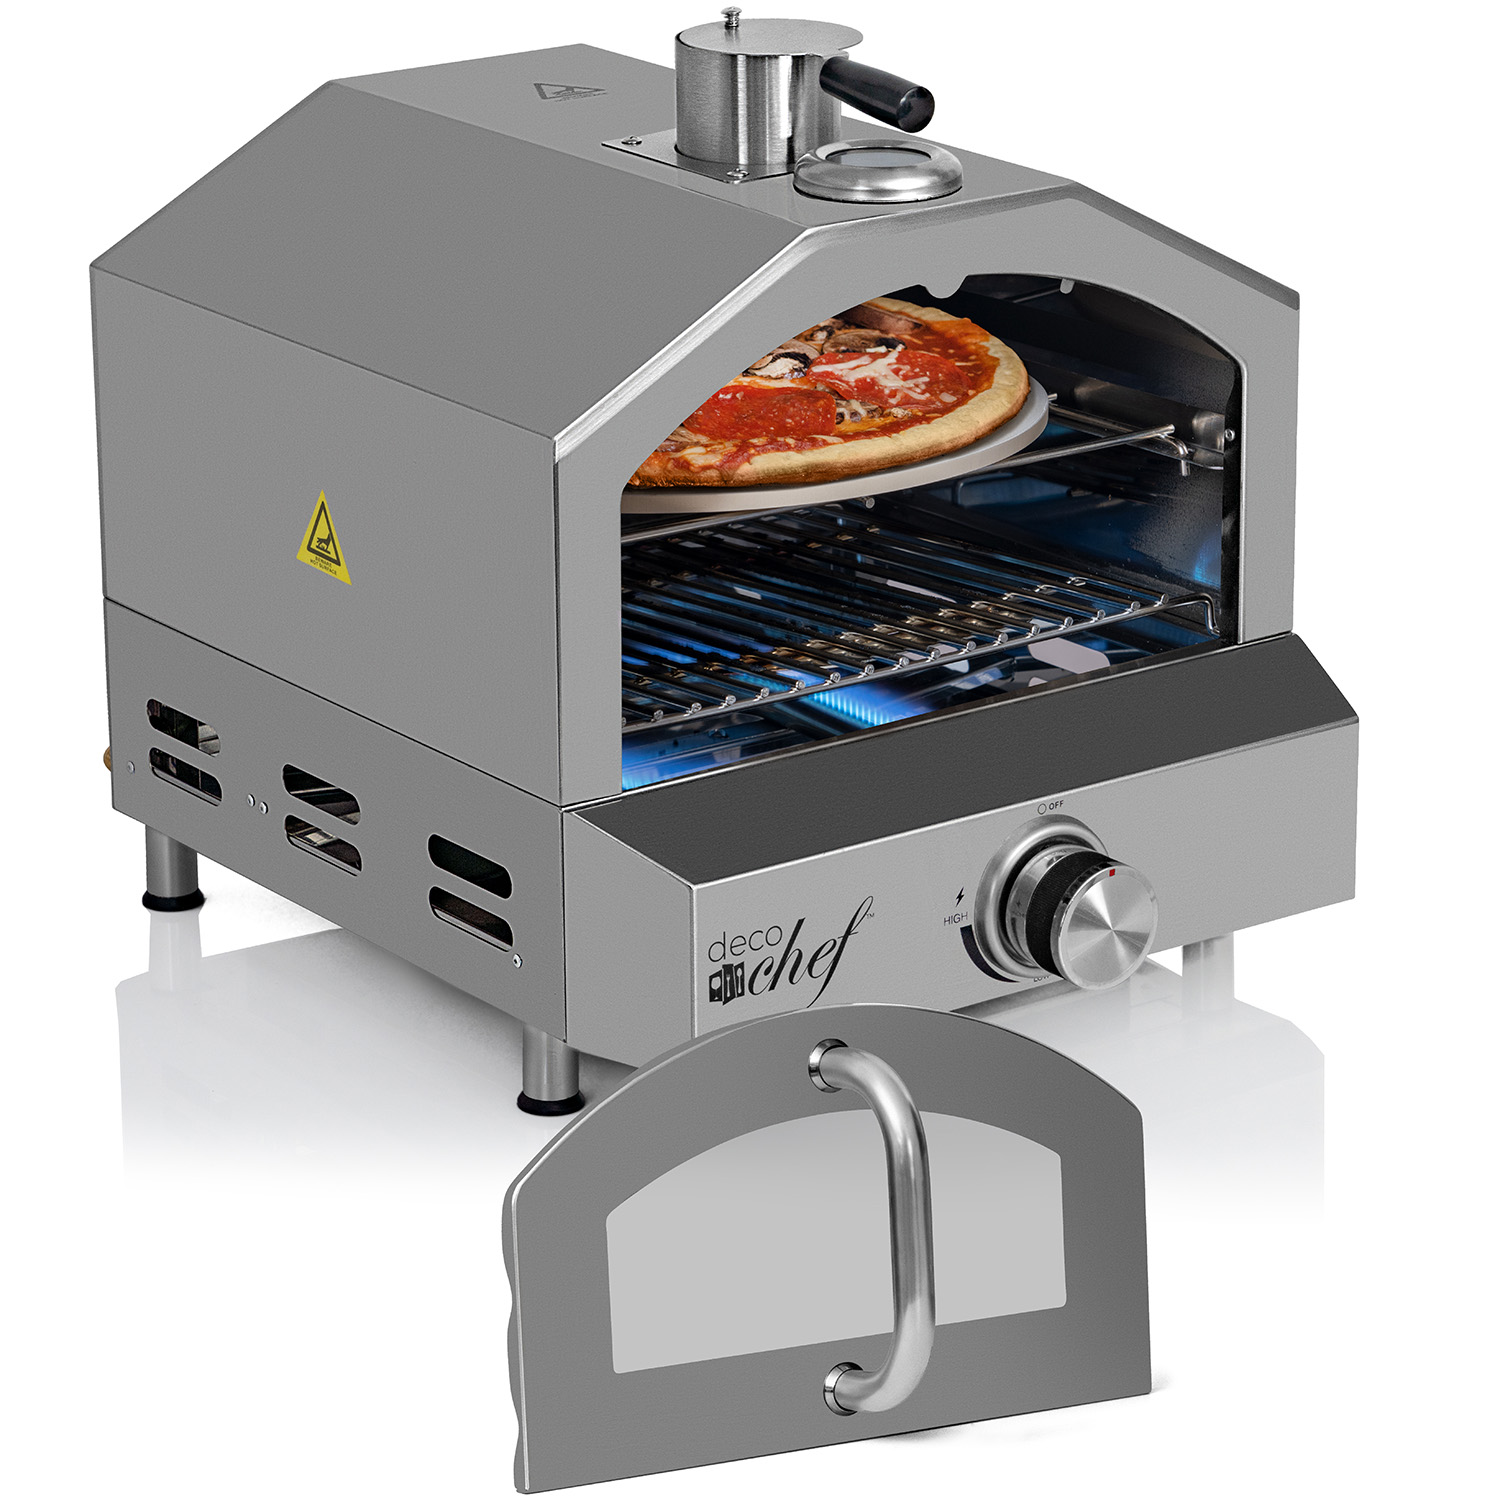 Deco Chef Portable Outdoor Pizza Oven and Grill with Propane Gas CSA Approved Regulator and Hose, Includes Pizza Peel, Stone, Easy Temperature Dial, Built-In Thermometer, and Grill Rack - image 1 of 11